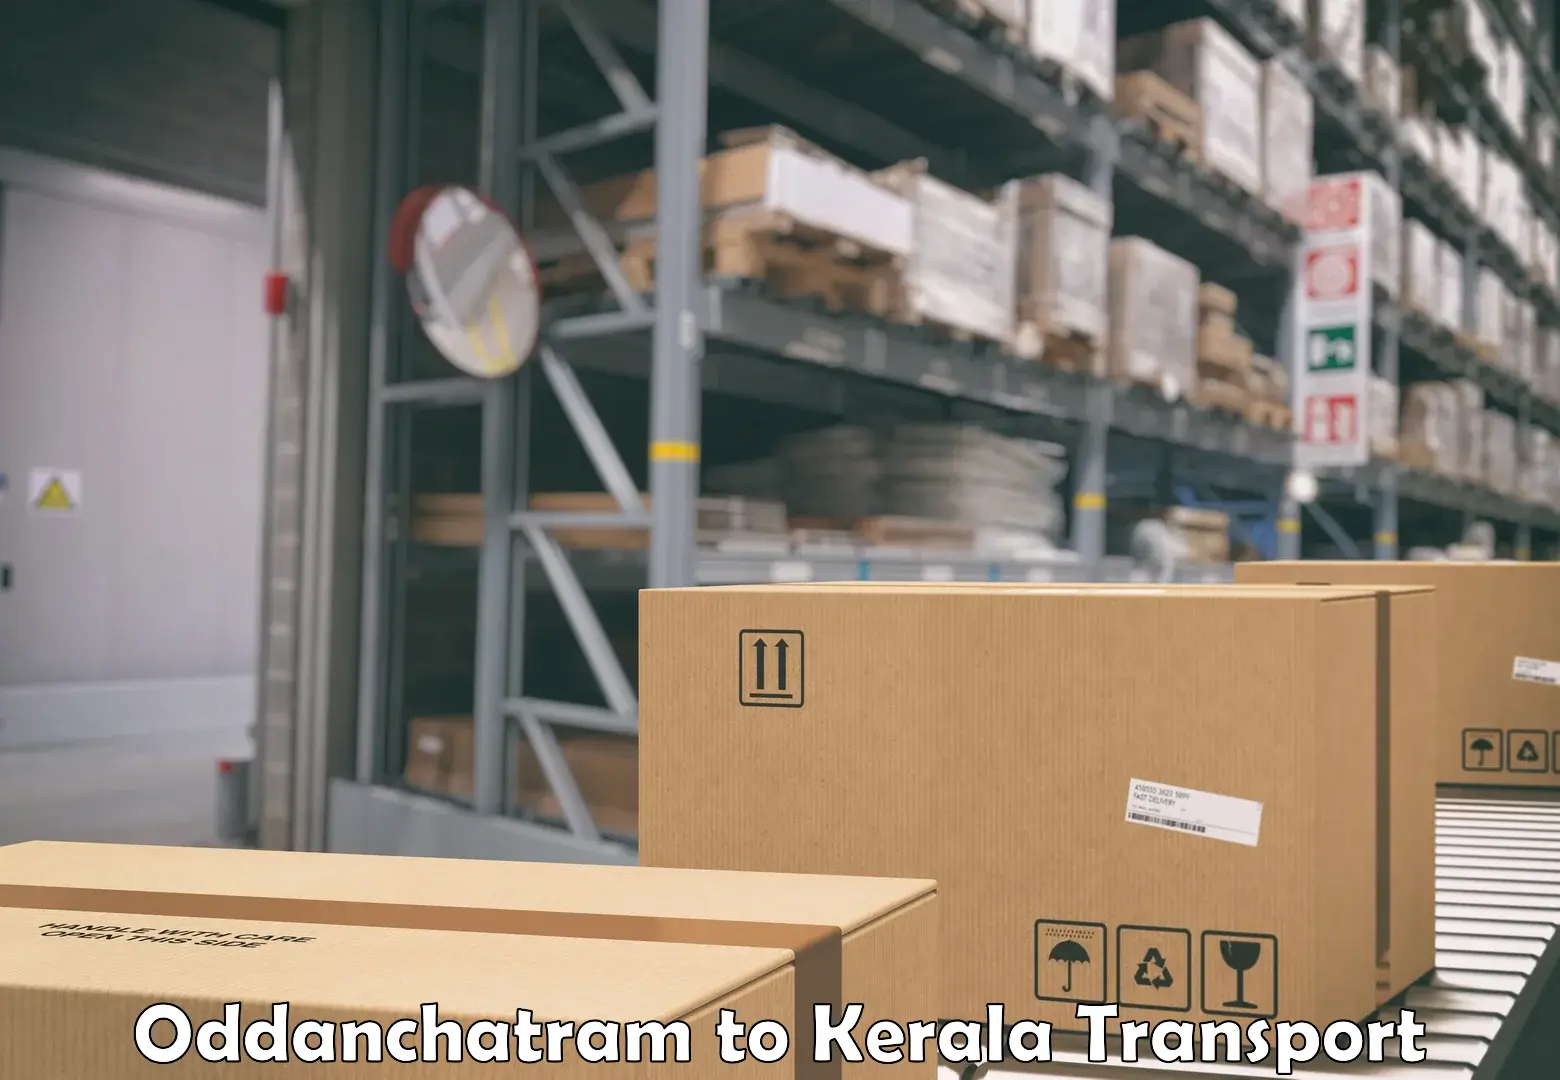 Truck transport companies in India Oddanchatram to Chalakudy